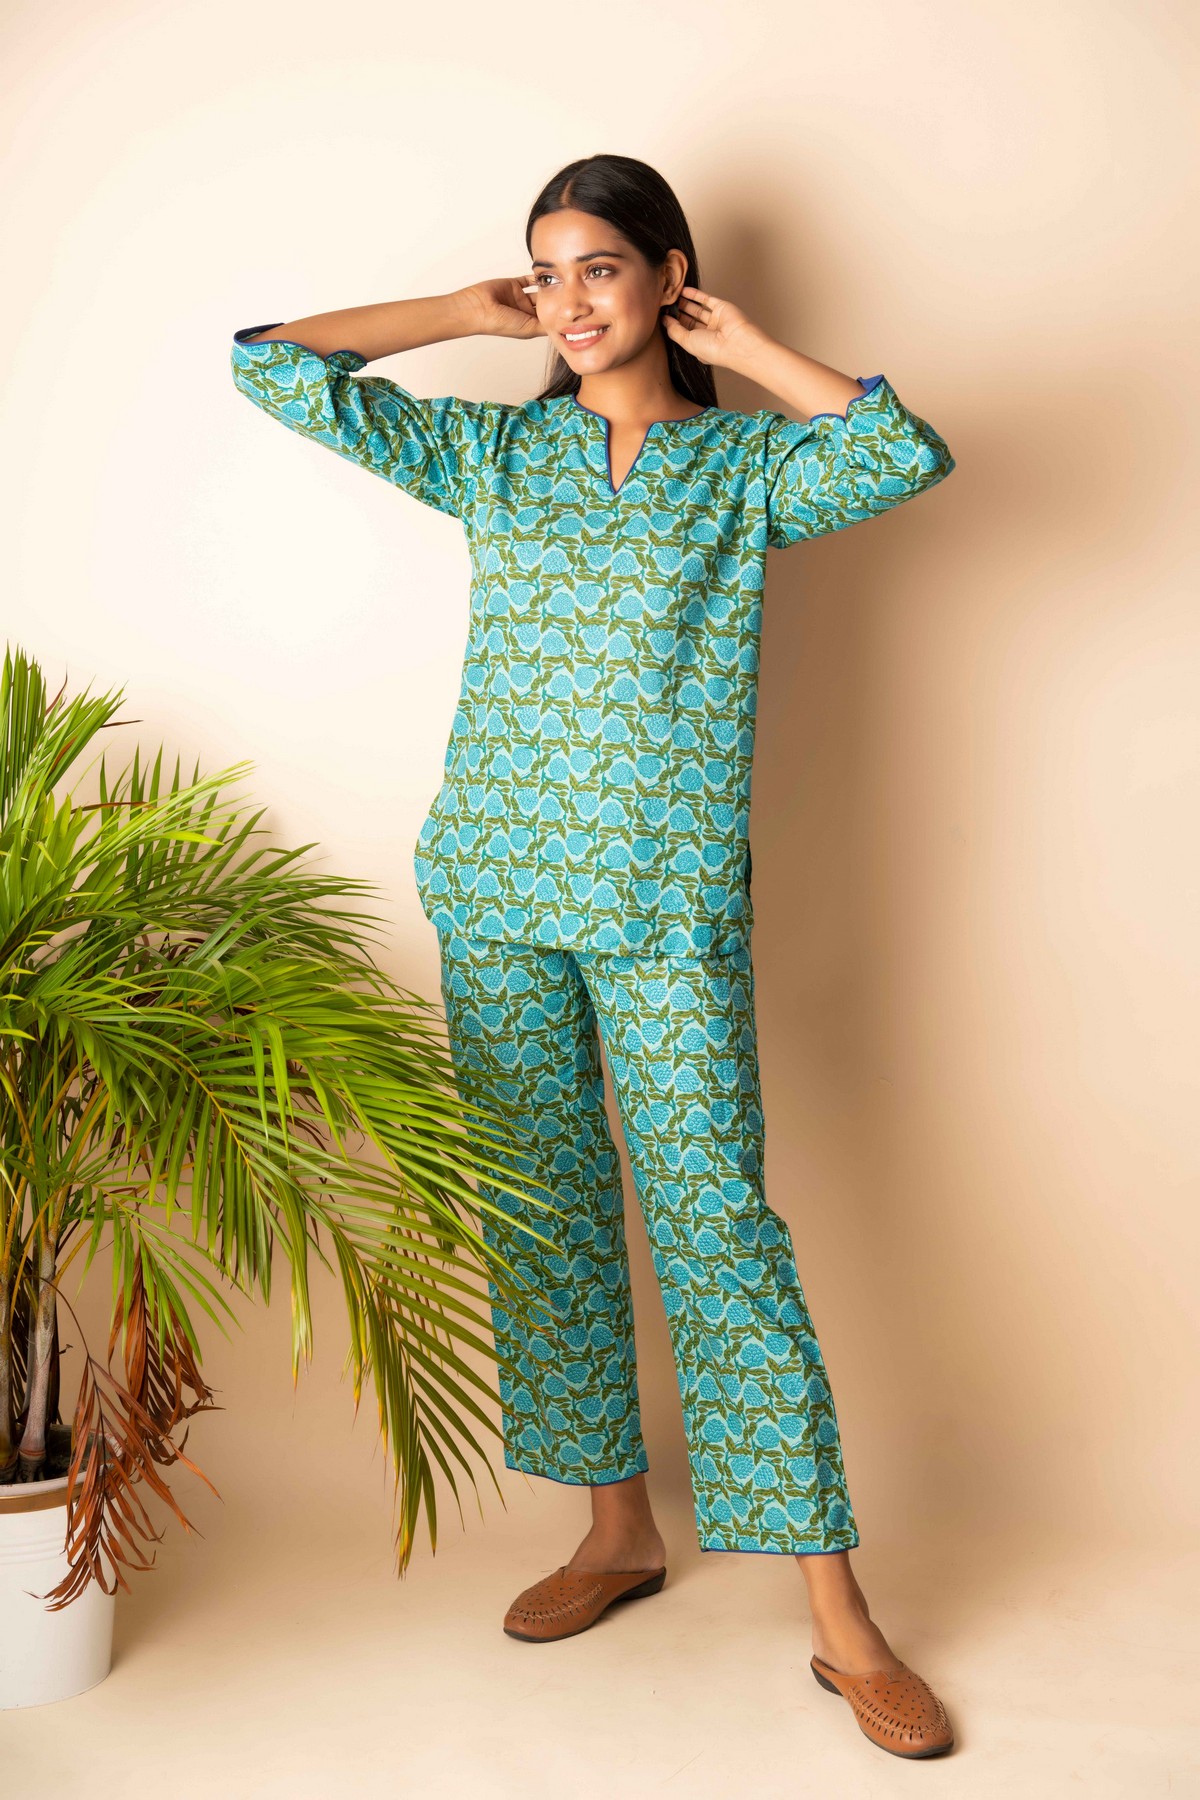 Buy Blue Cotton Hand Block Printed Set for Women Online at Fabindia |  20021806